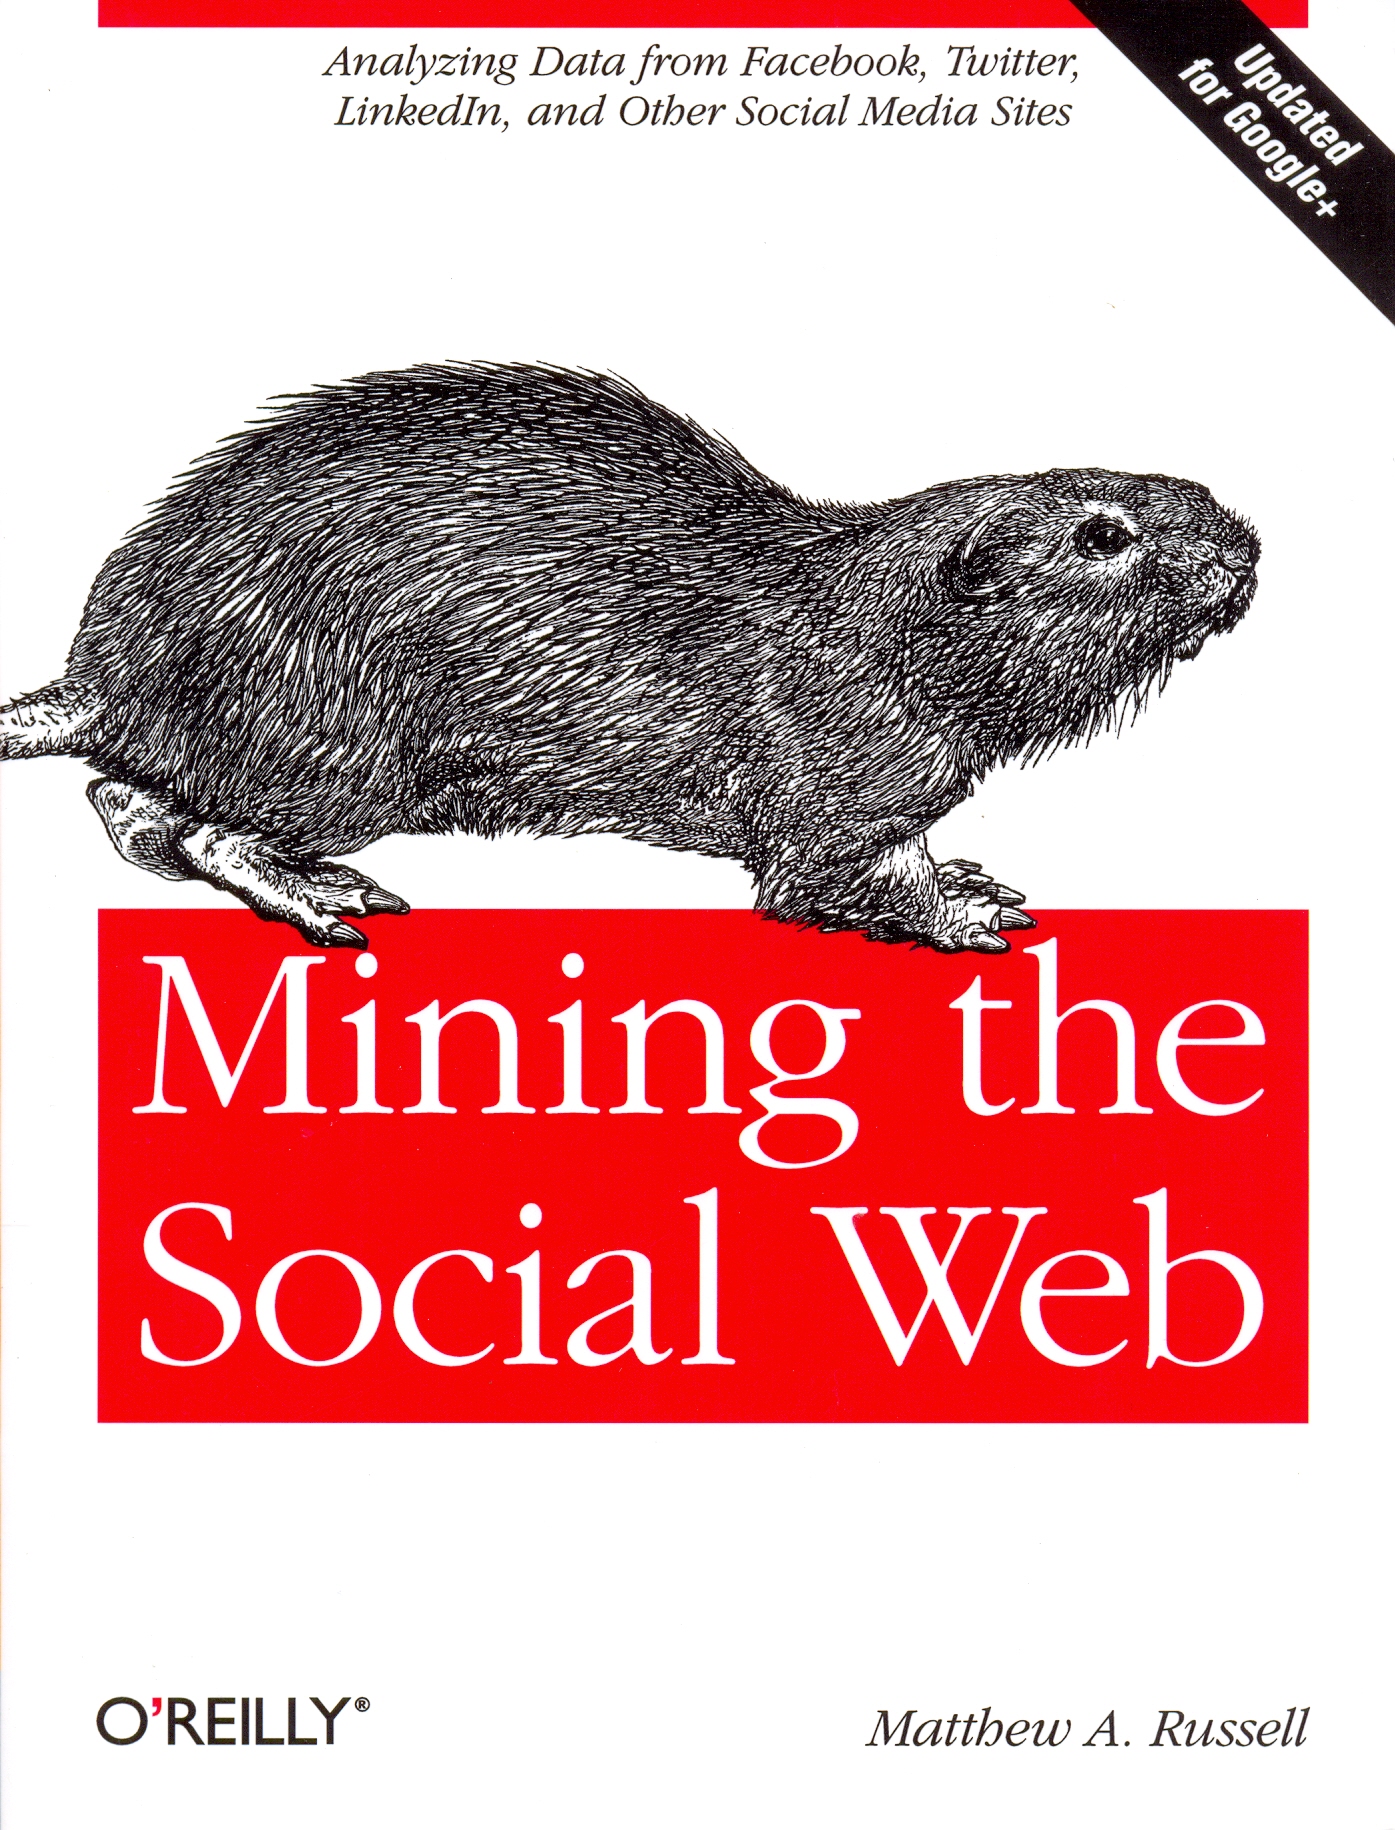 Mining the Social Web Analyzing Data from Facebook, Twitter, LinkedIn, and Other Social Media Sites